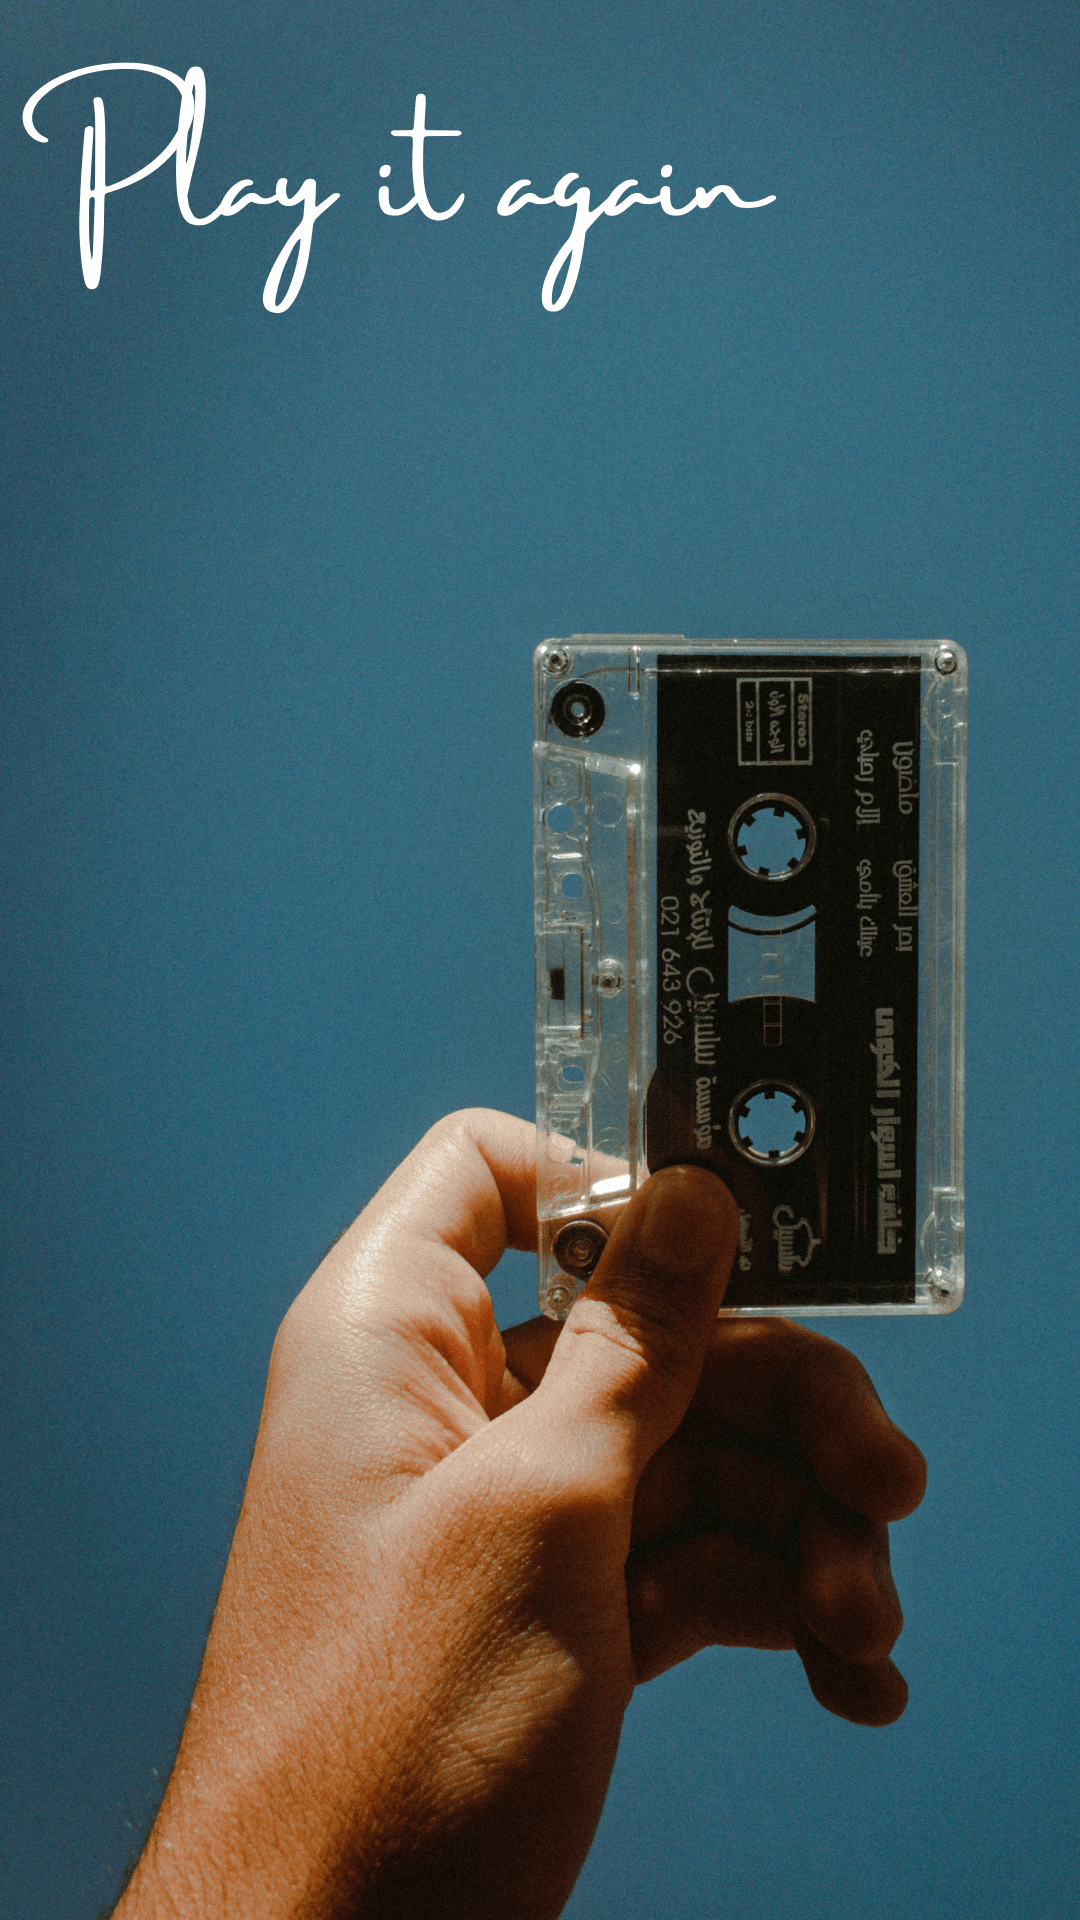 A hand holding a cassette tape against a blue background - Phone